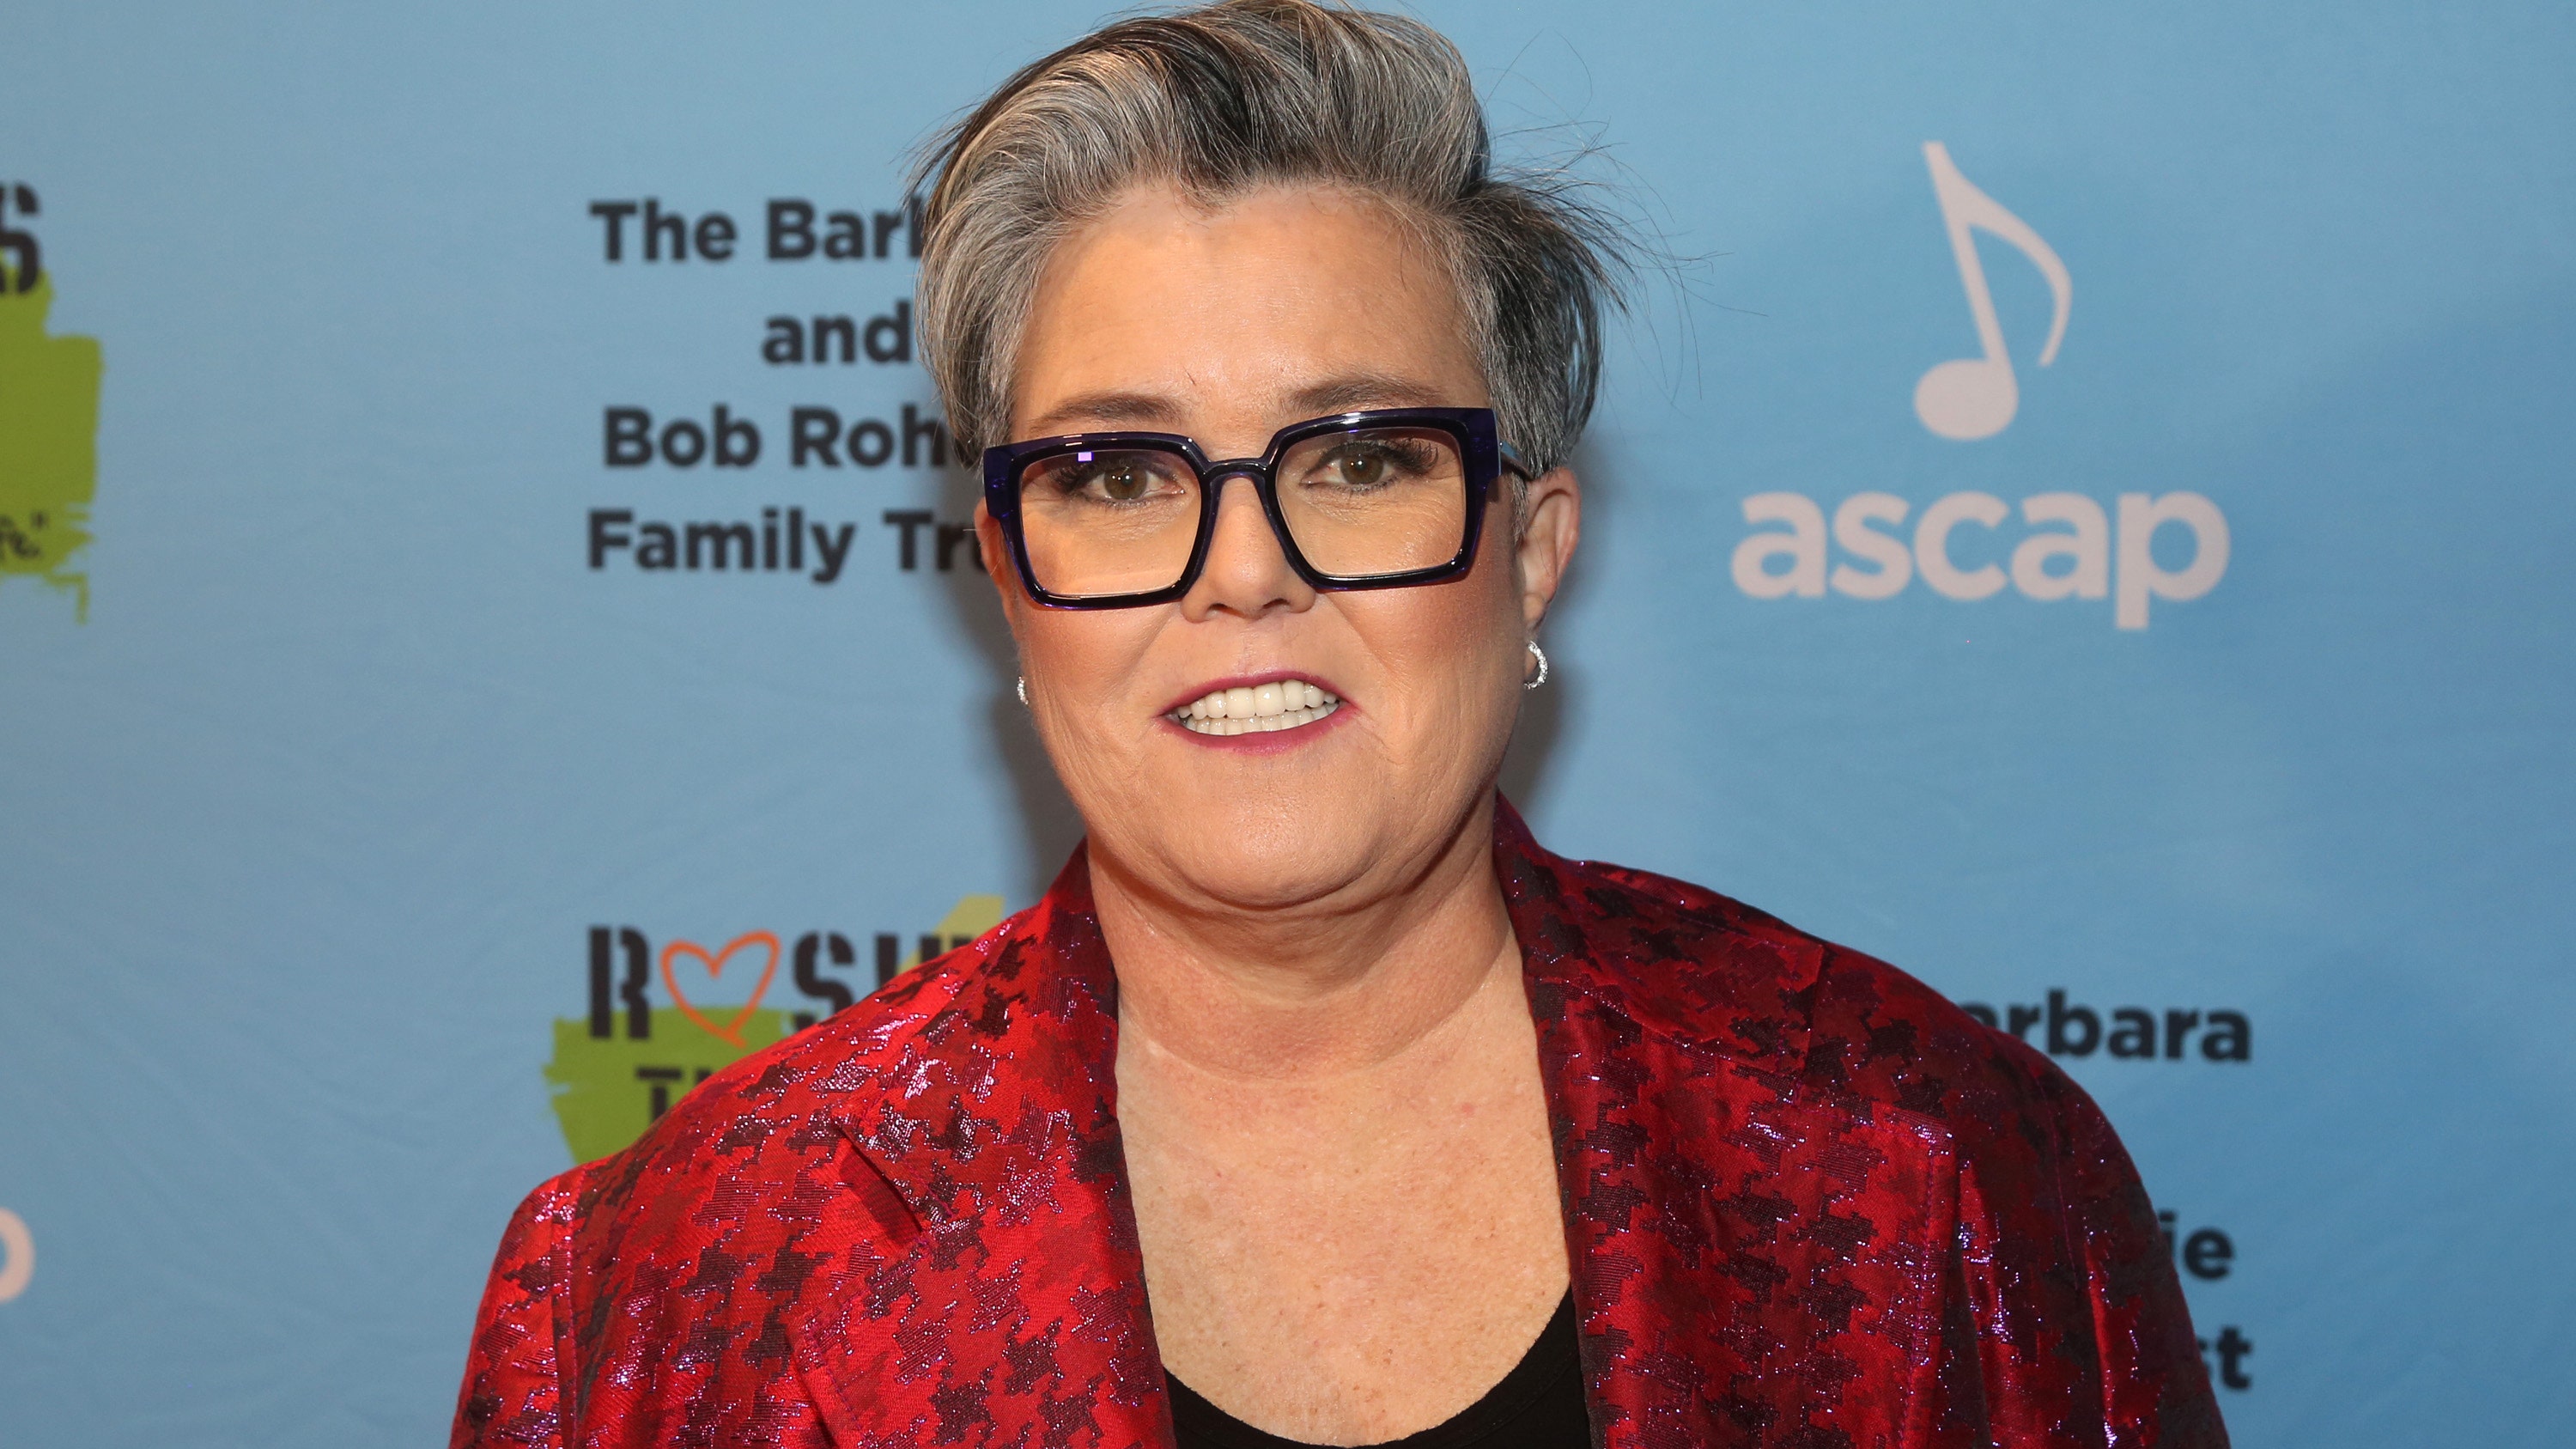 Rosie O'Donnell joins celebrities who blame Donald Trump for COVID19